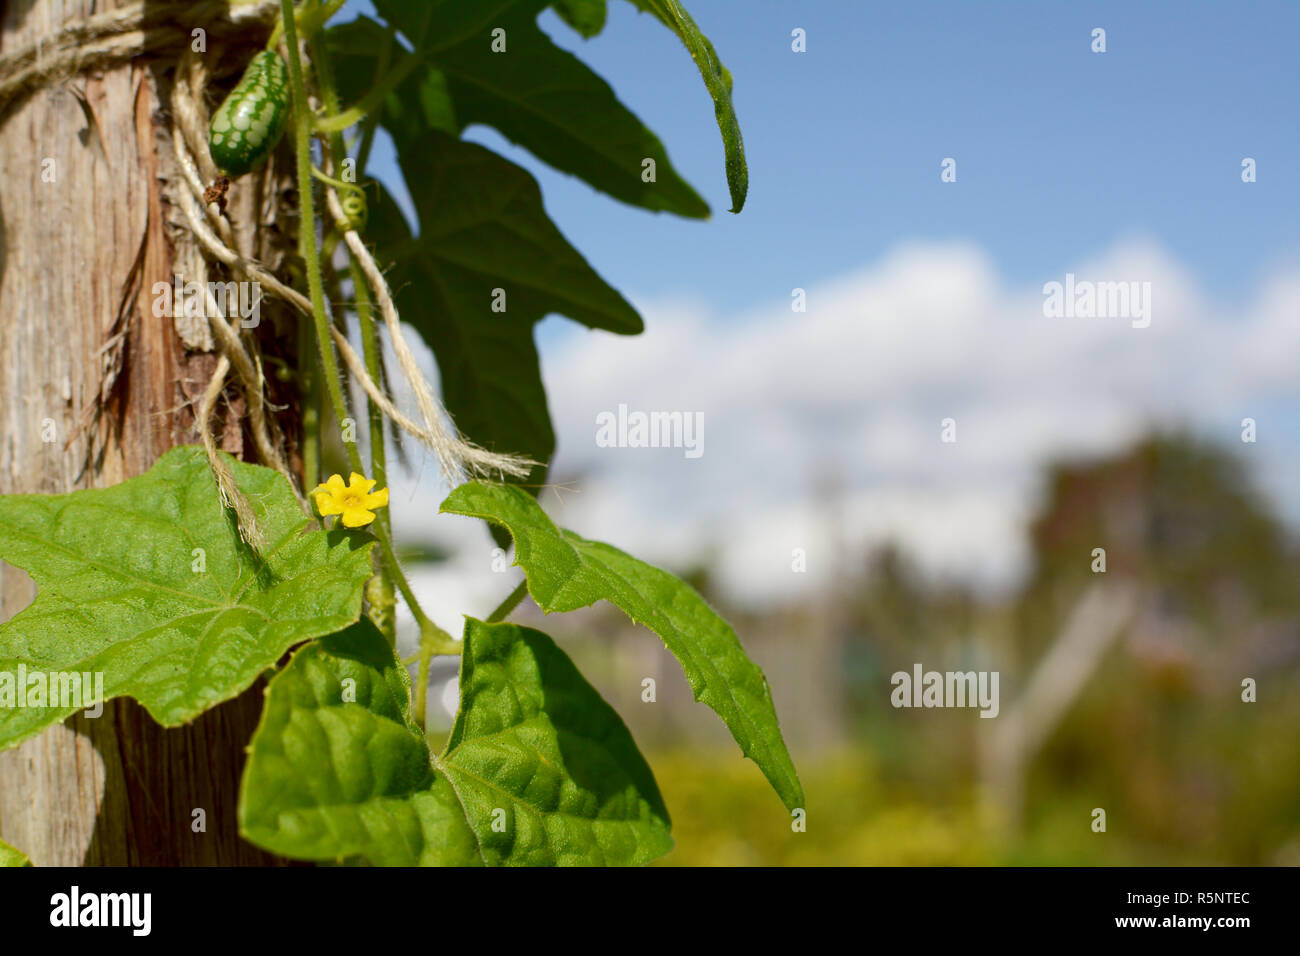 Small yellow flower on cucamelon vine Stock Photo